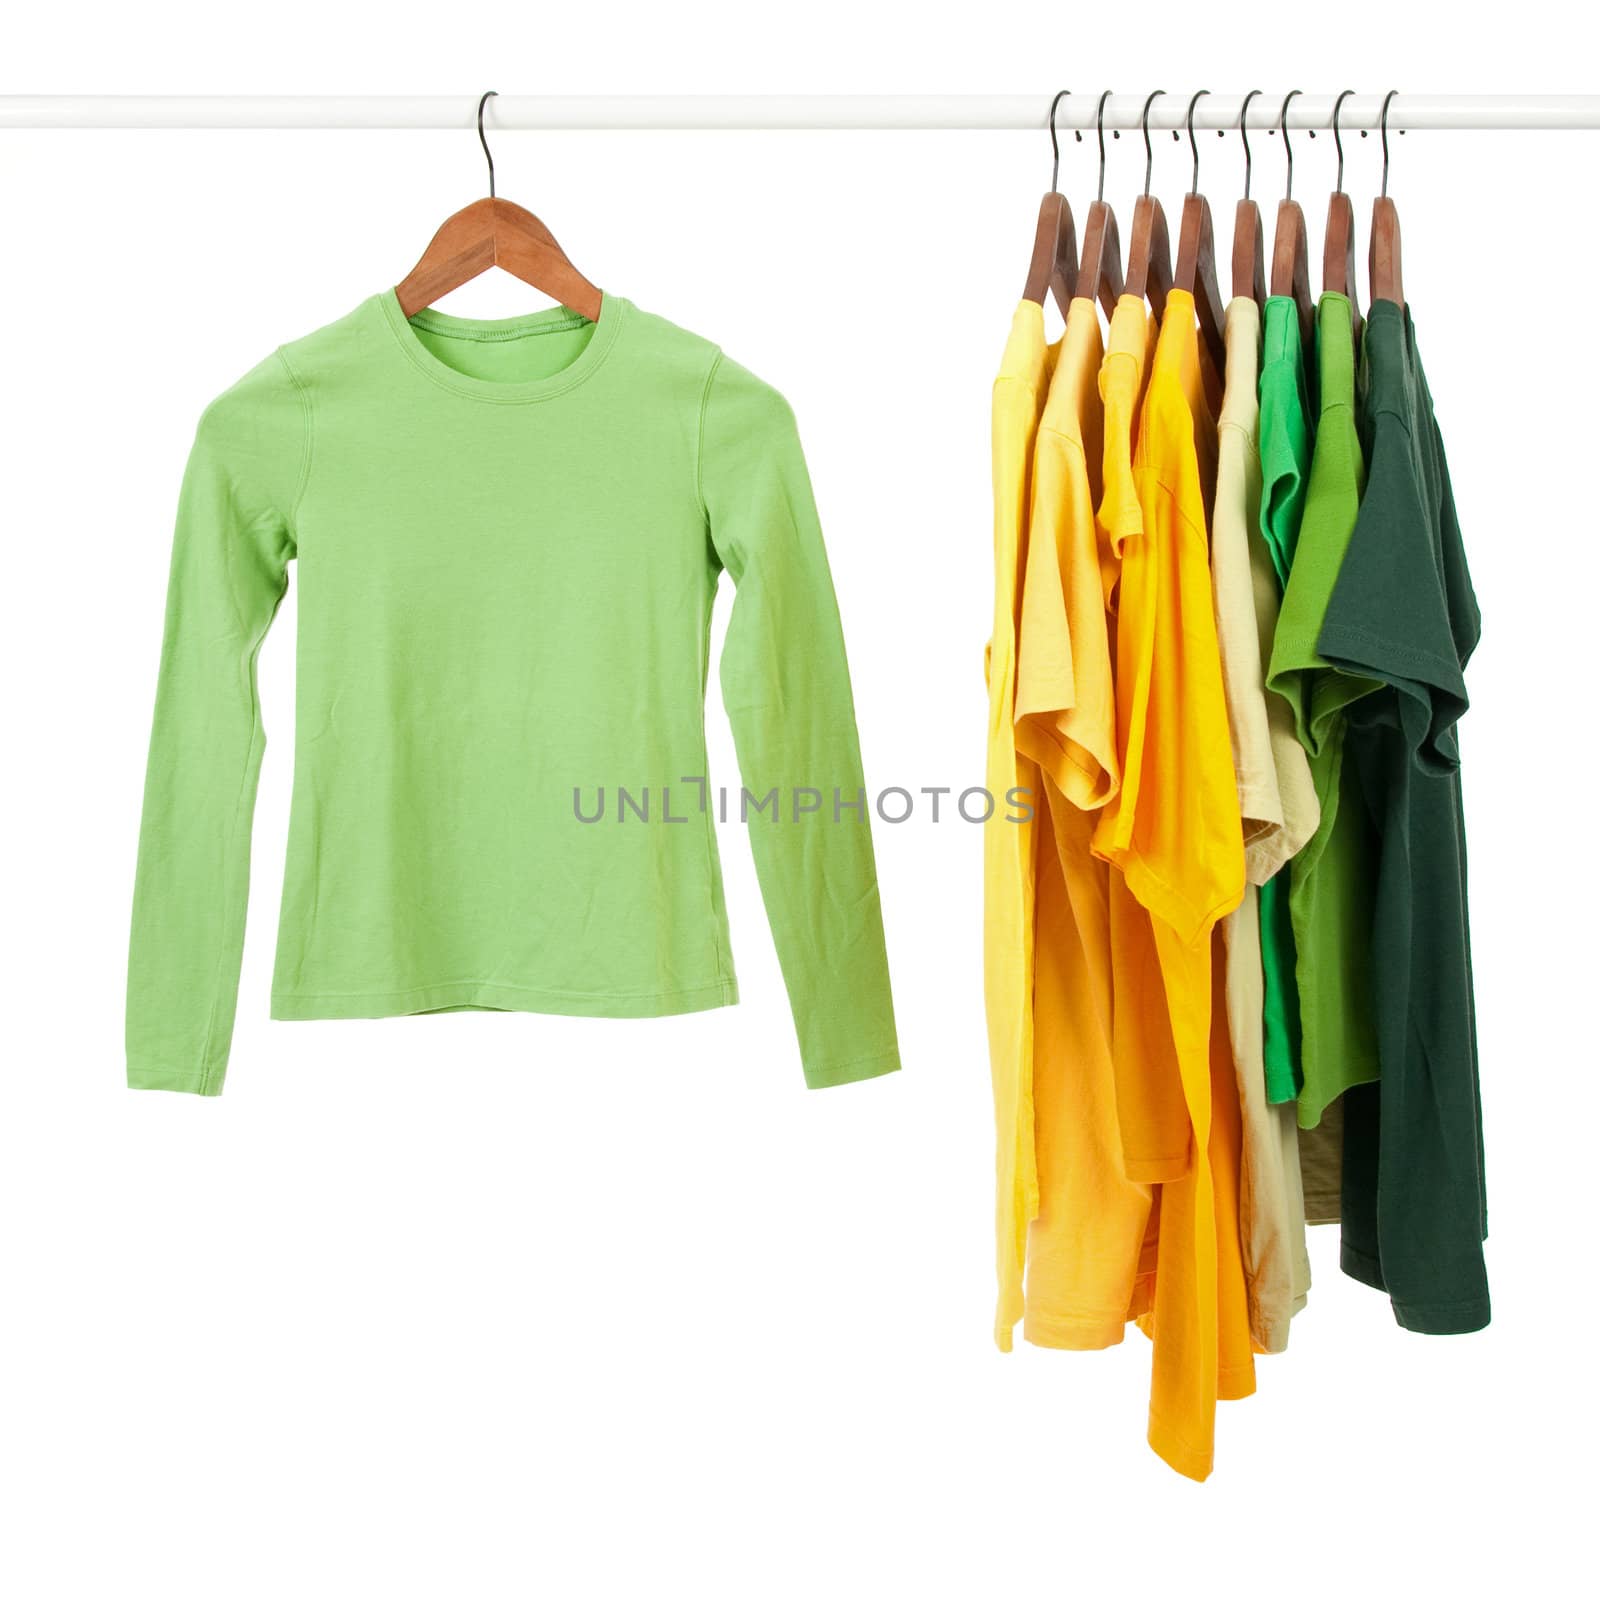 Green and yellow shirts on wooden hangers by anikasalsera